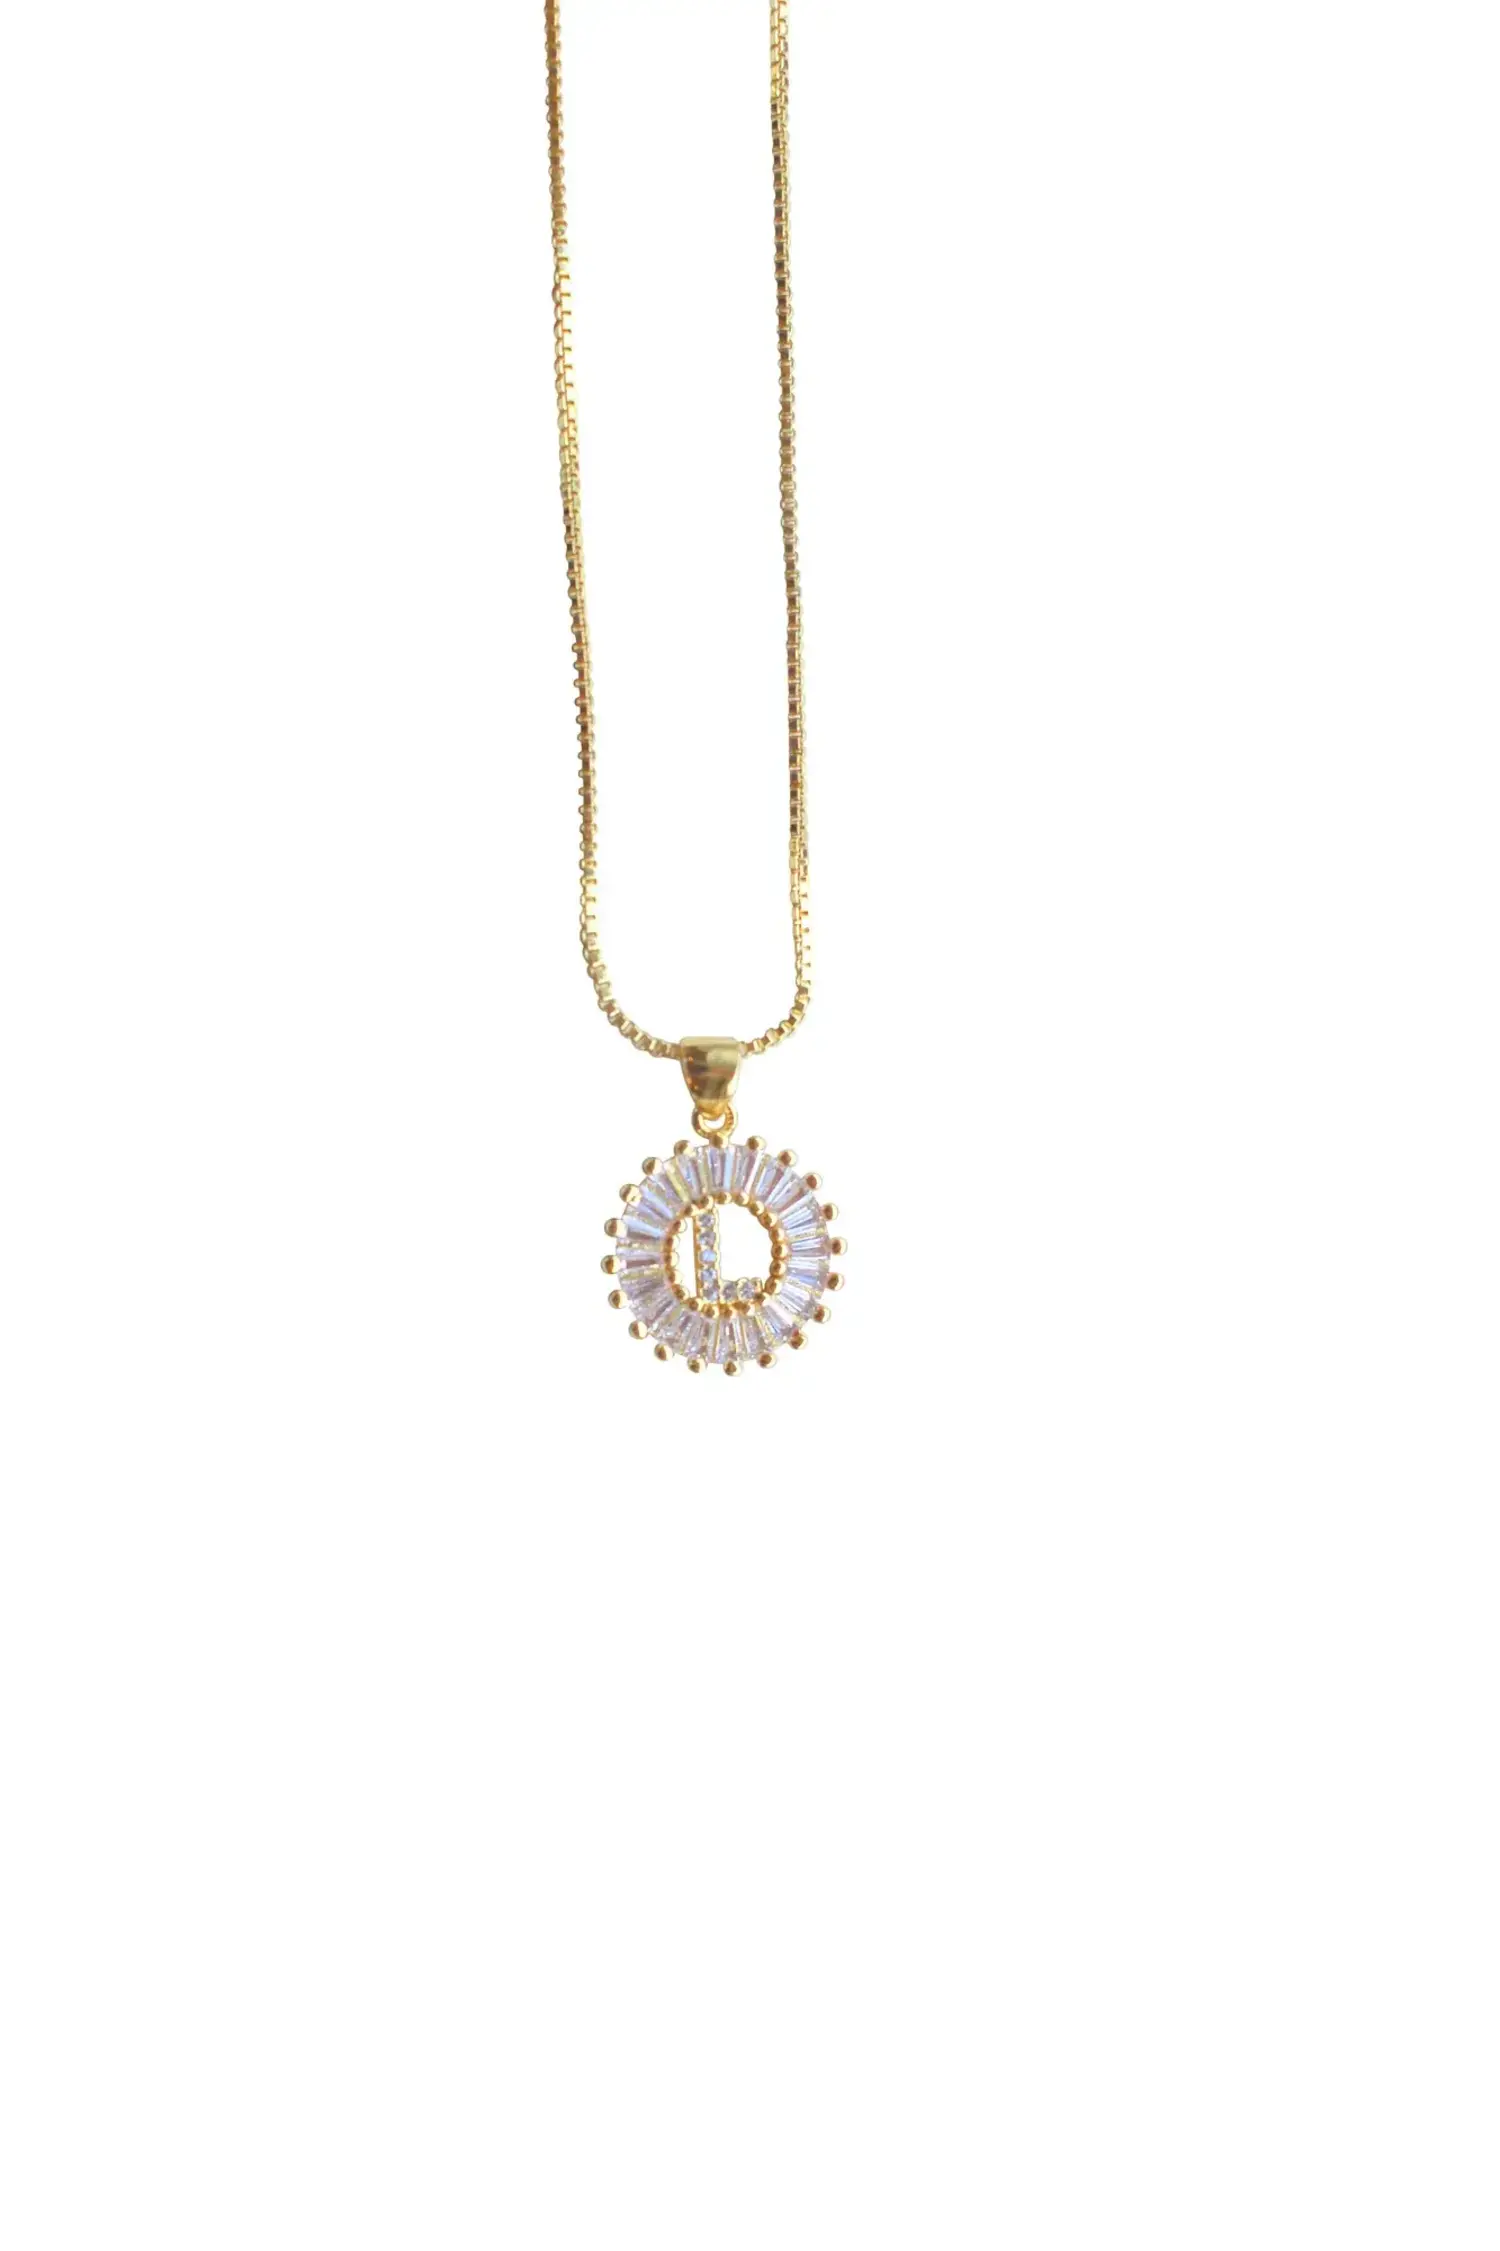 Initial Necklaces | Nordstrom